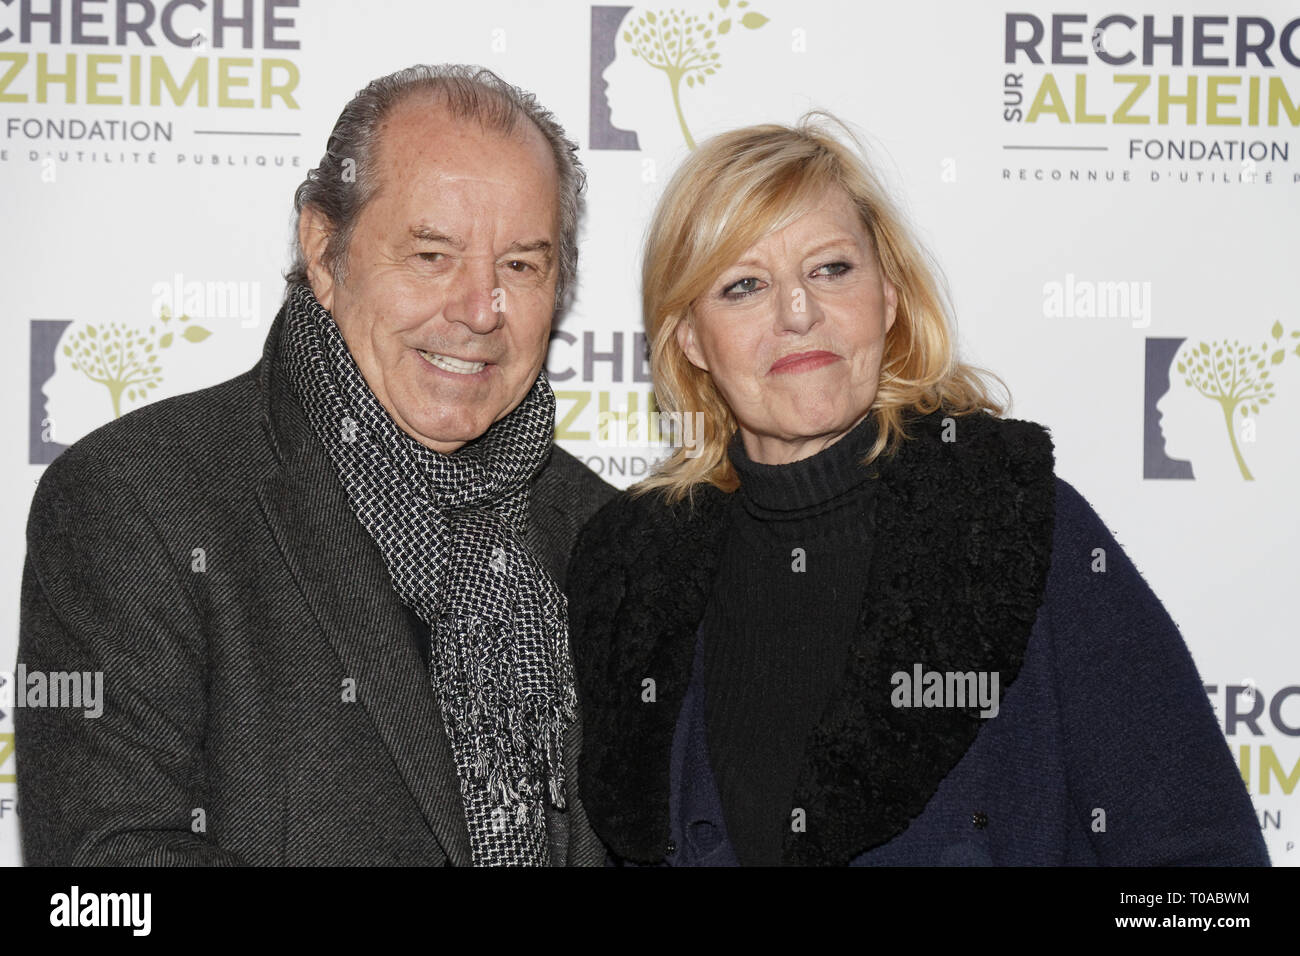 Paris, France. 18th Mar 2019. Christian Morin and Chantal Ladesou - Photocall of the 14th Gala 2019 of the Association for Alzheimer Research at the Olympia in Paris on March 18, 2019 Credit: Véronique PHITOUSSI/Alamy Live News Stock Photo